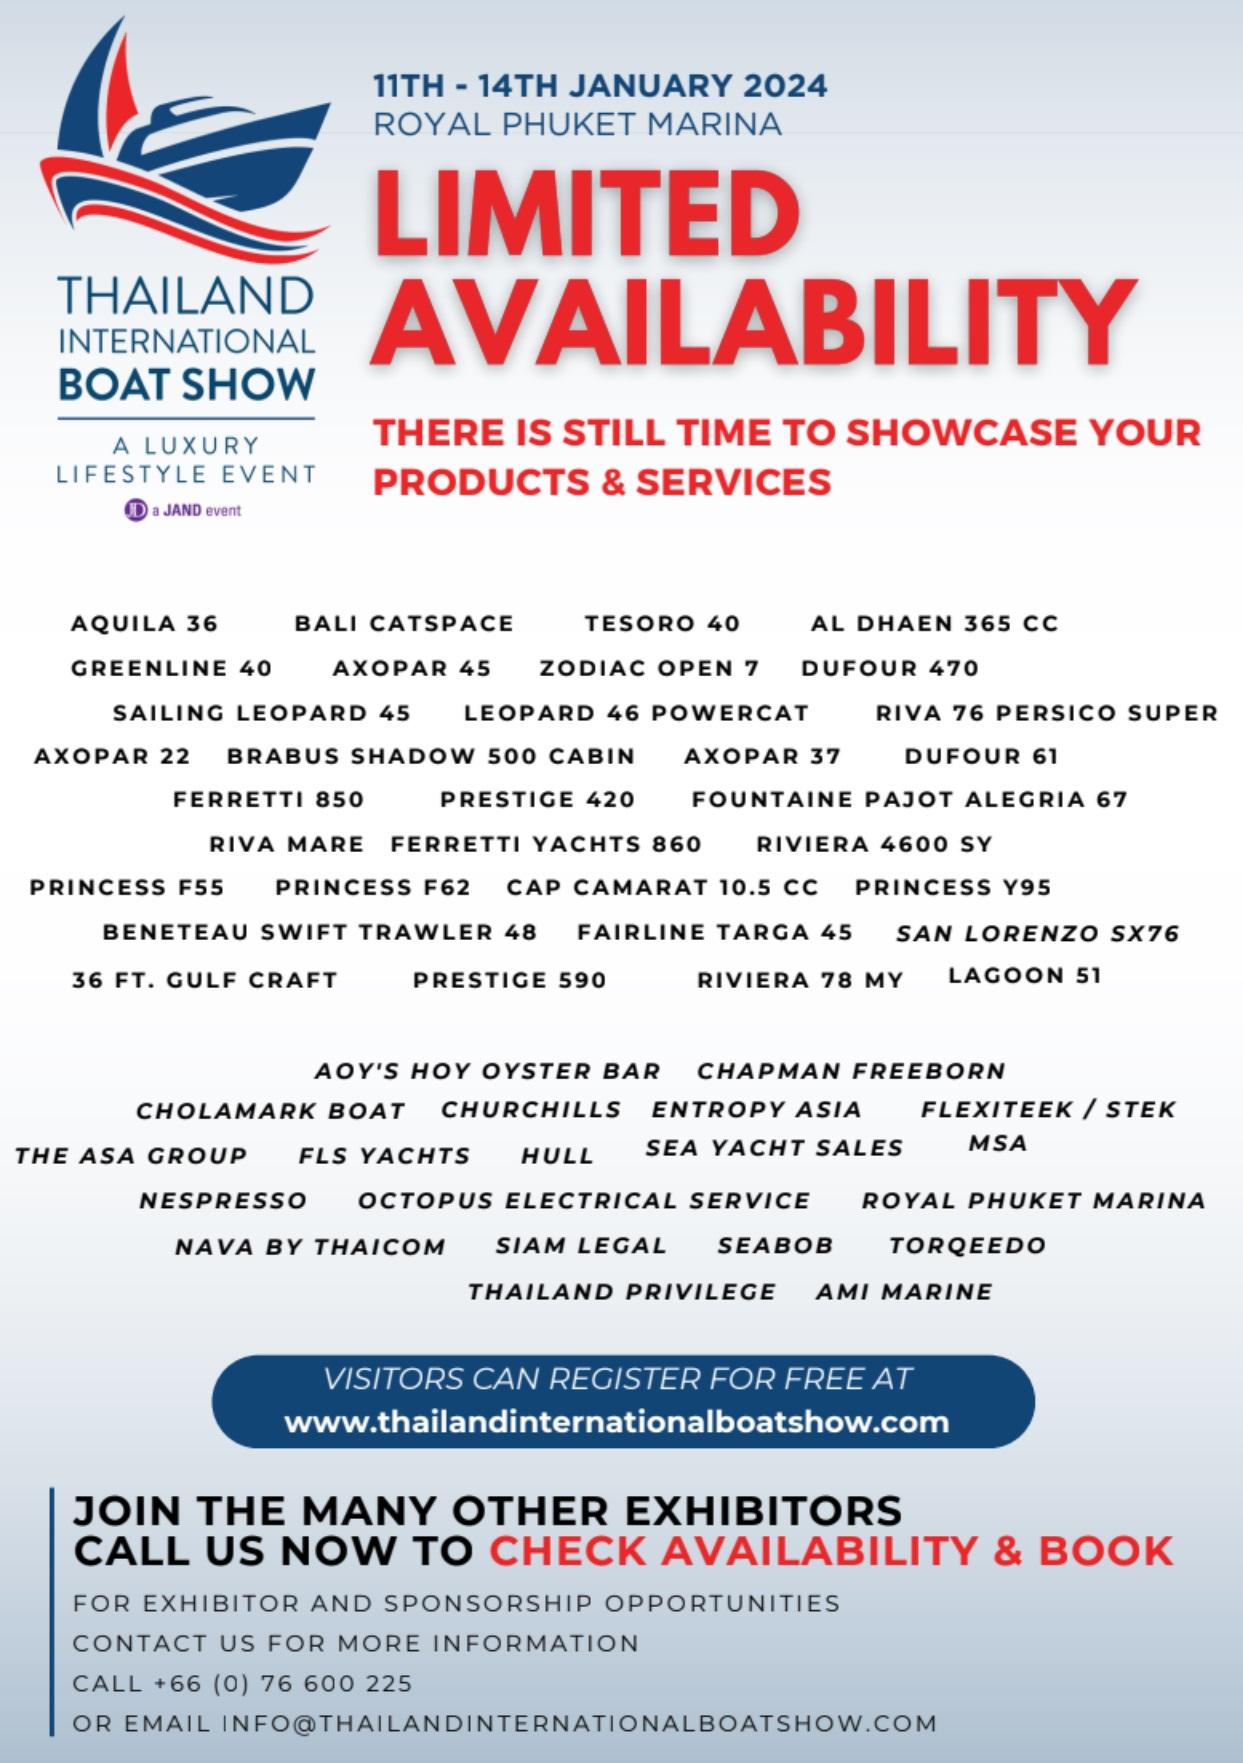 Time is running out! Showcase your excellence at the Thailand International Boat Show A Luxury Lifestyle Event 2024 - limited availability